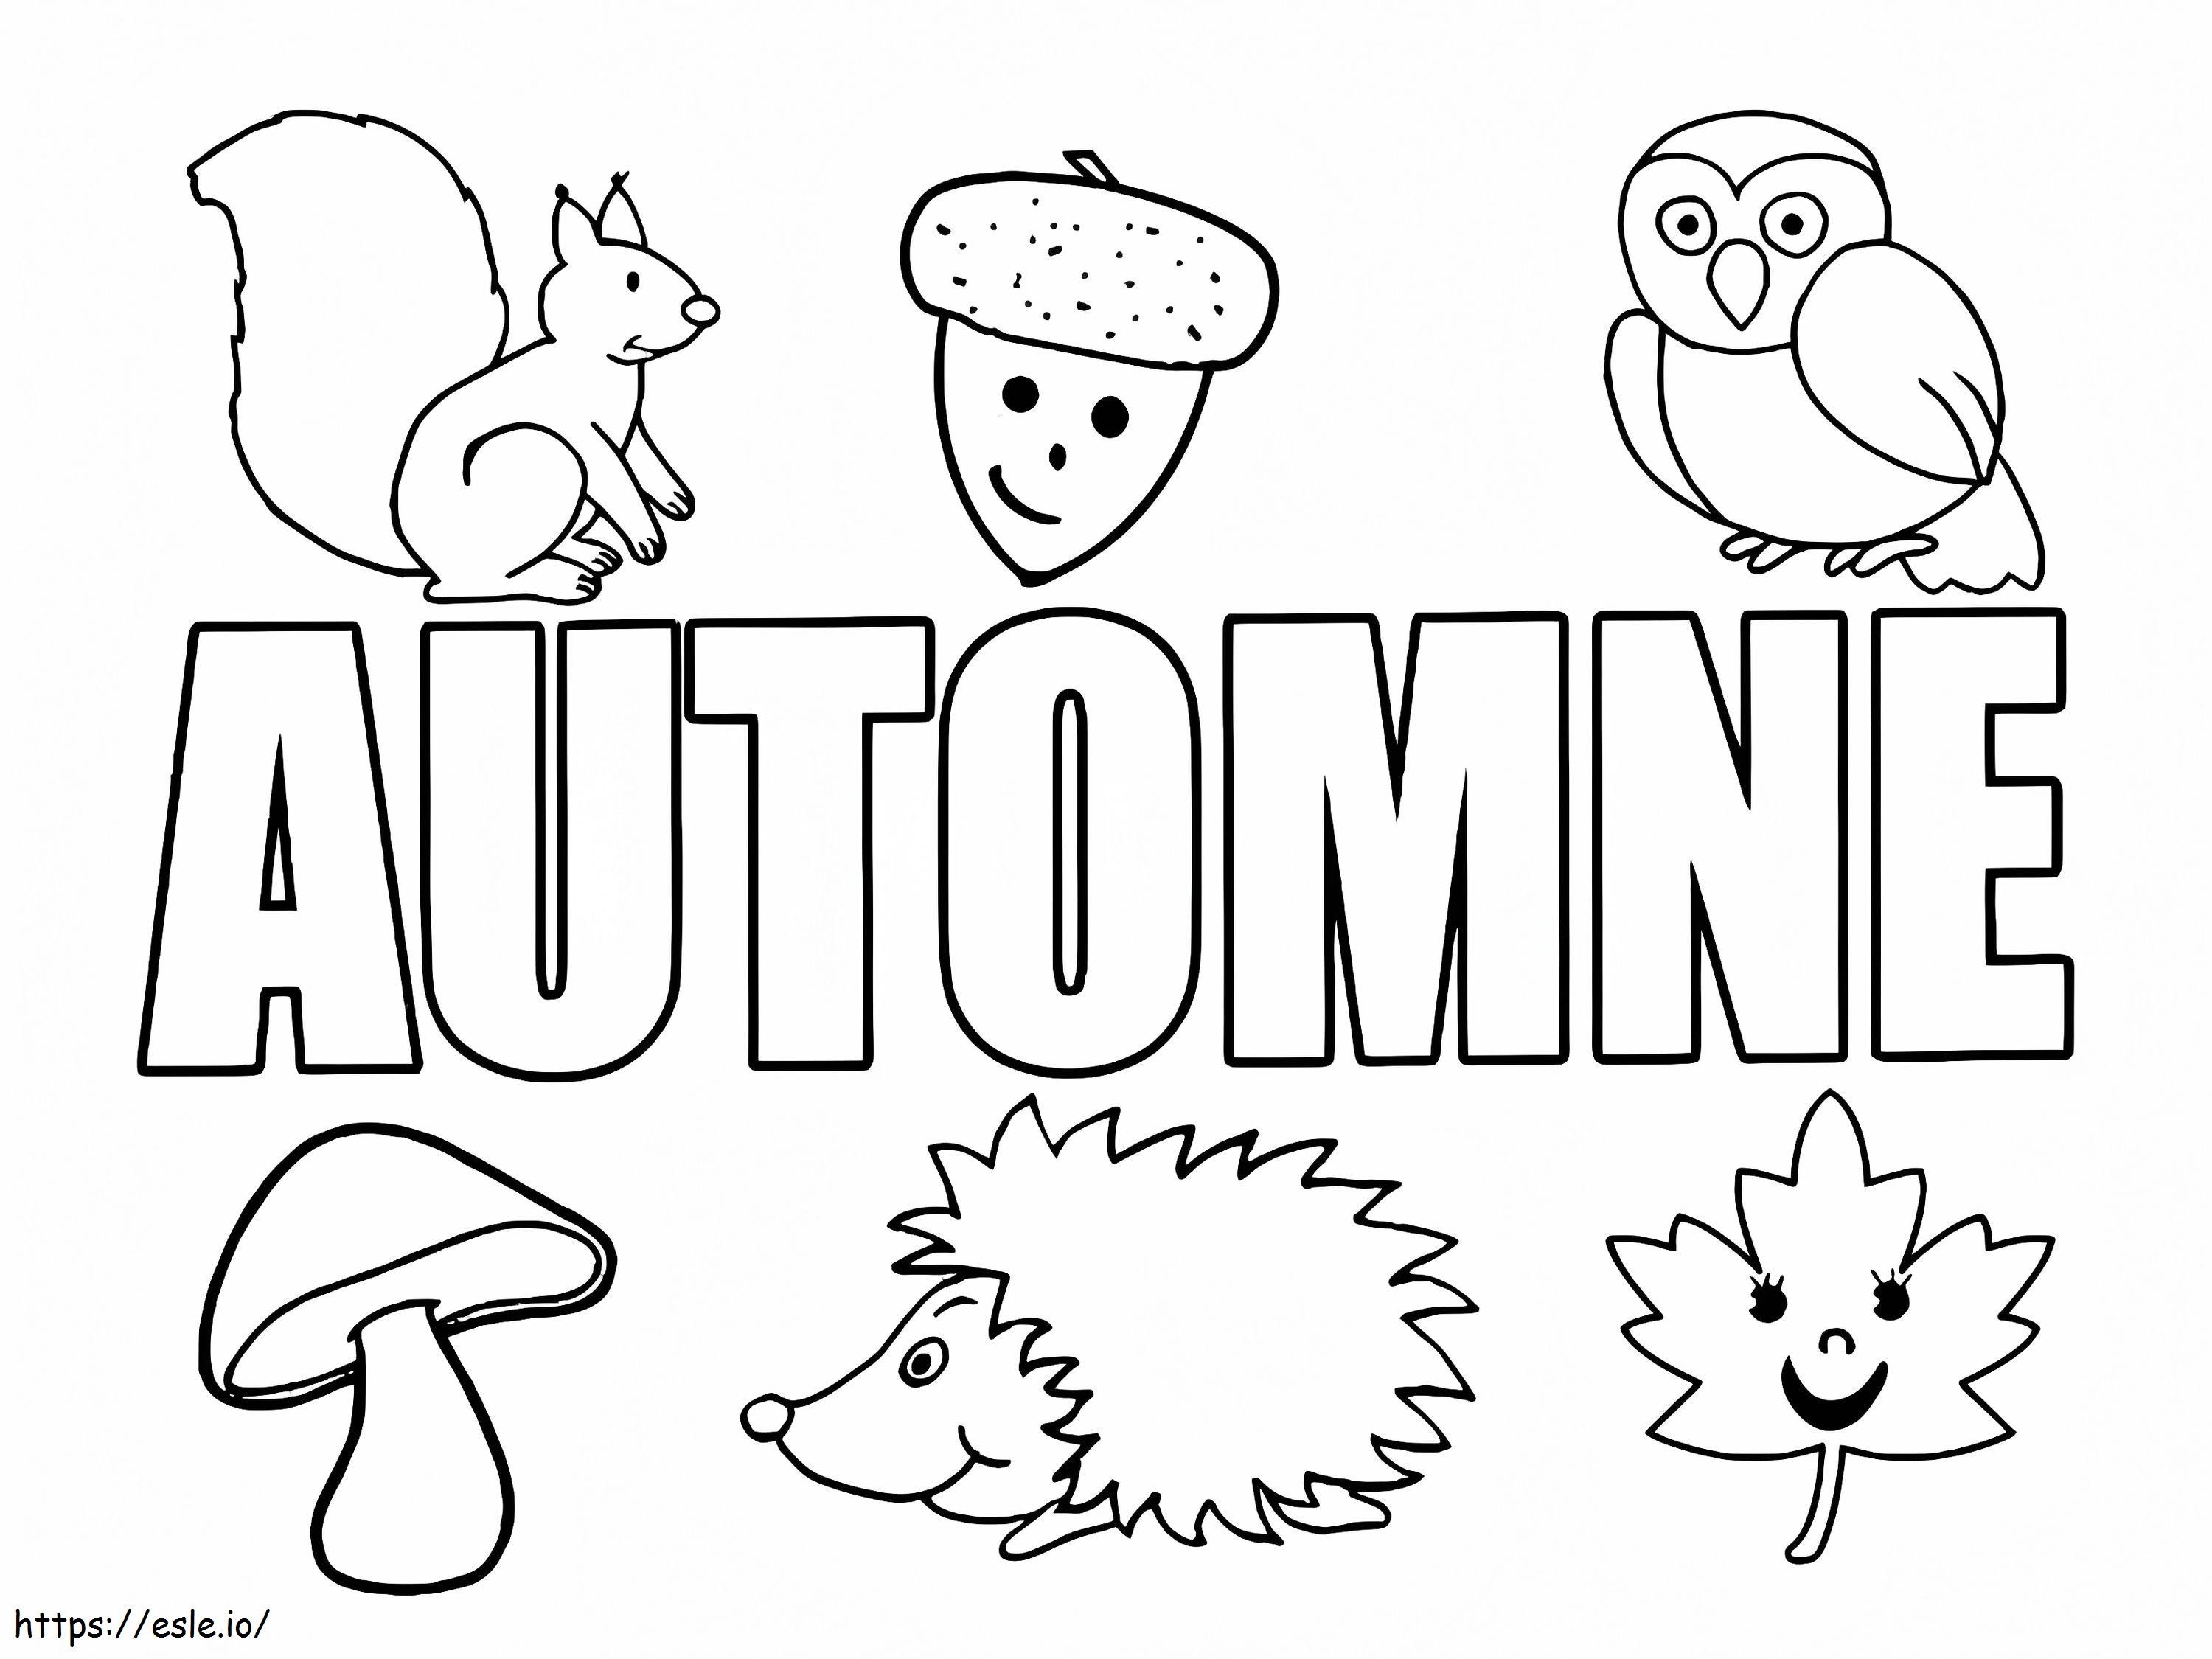 Fall 3 coloring page